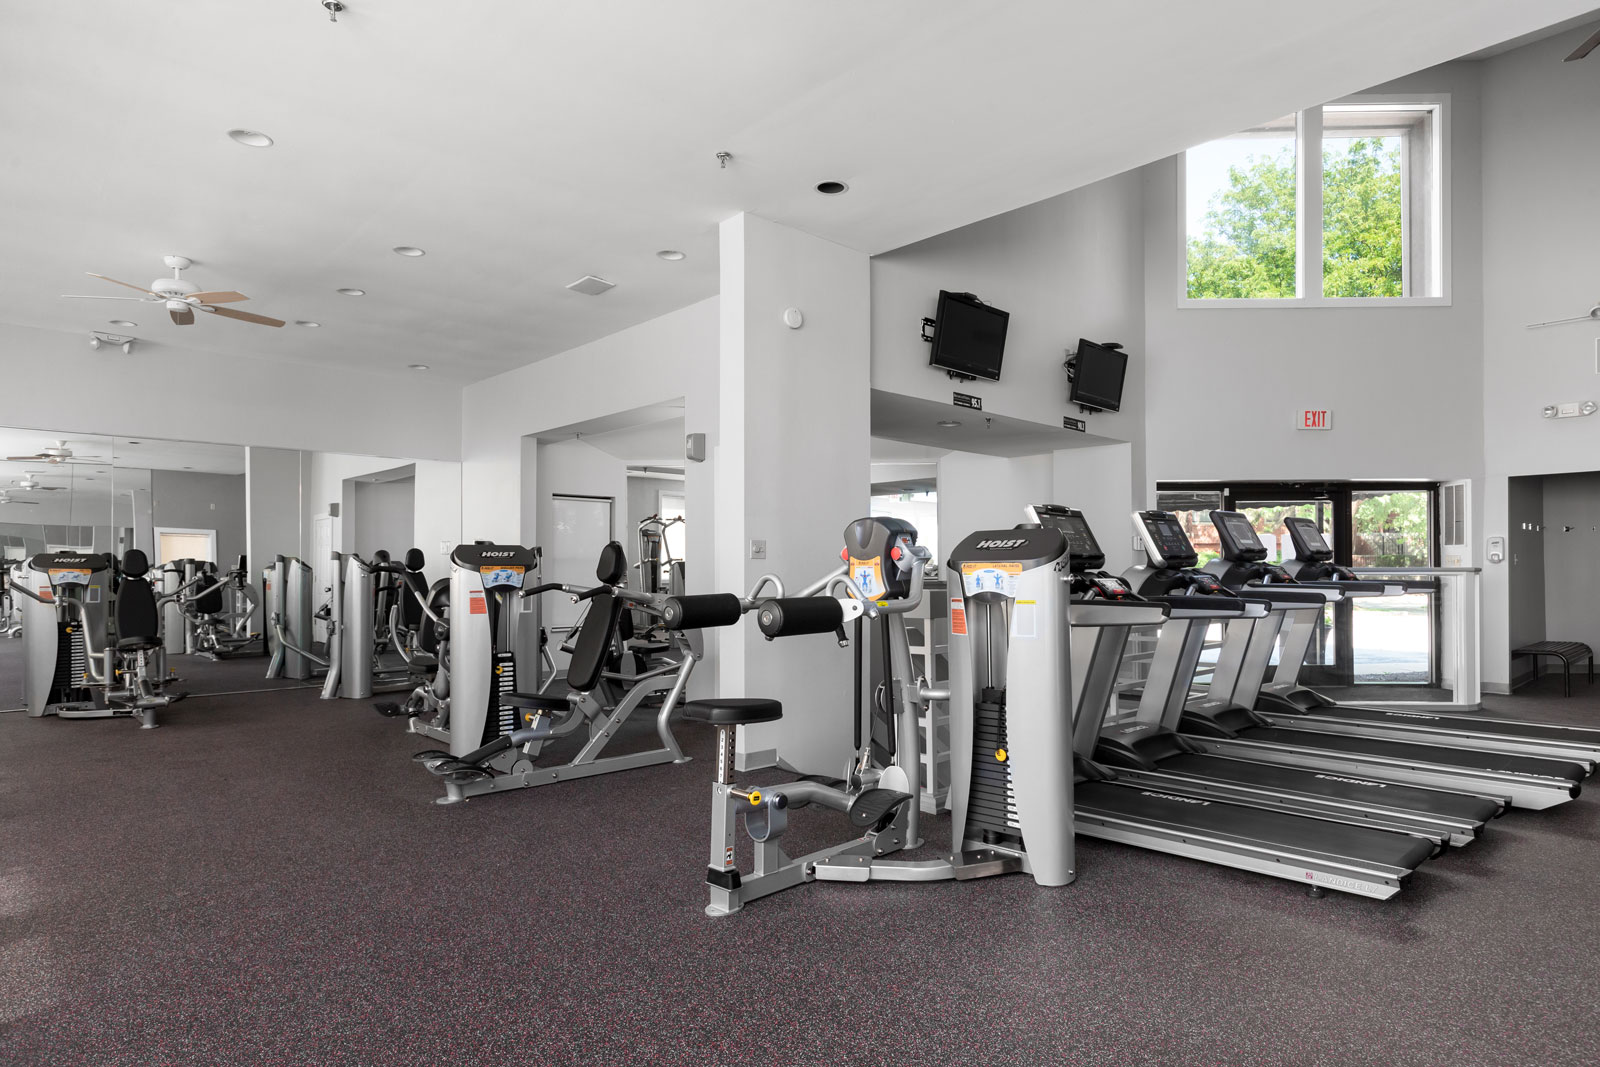 Fitness center at Chesterfield Village Apartments